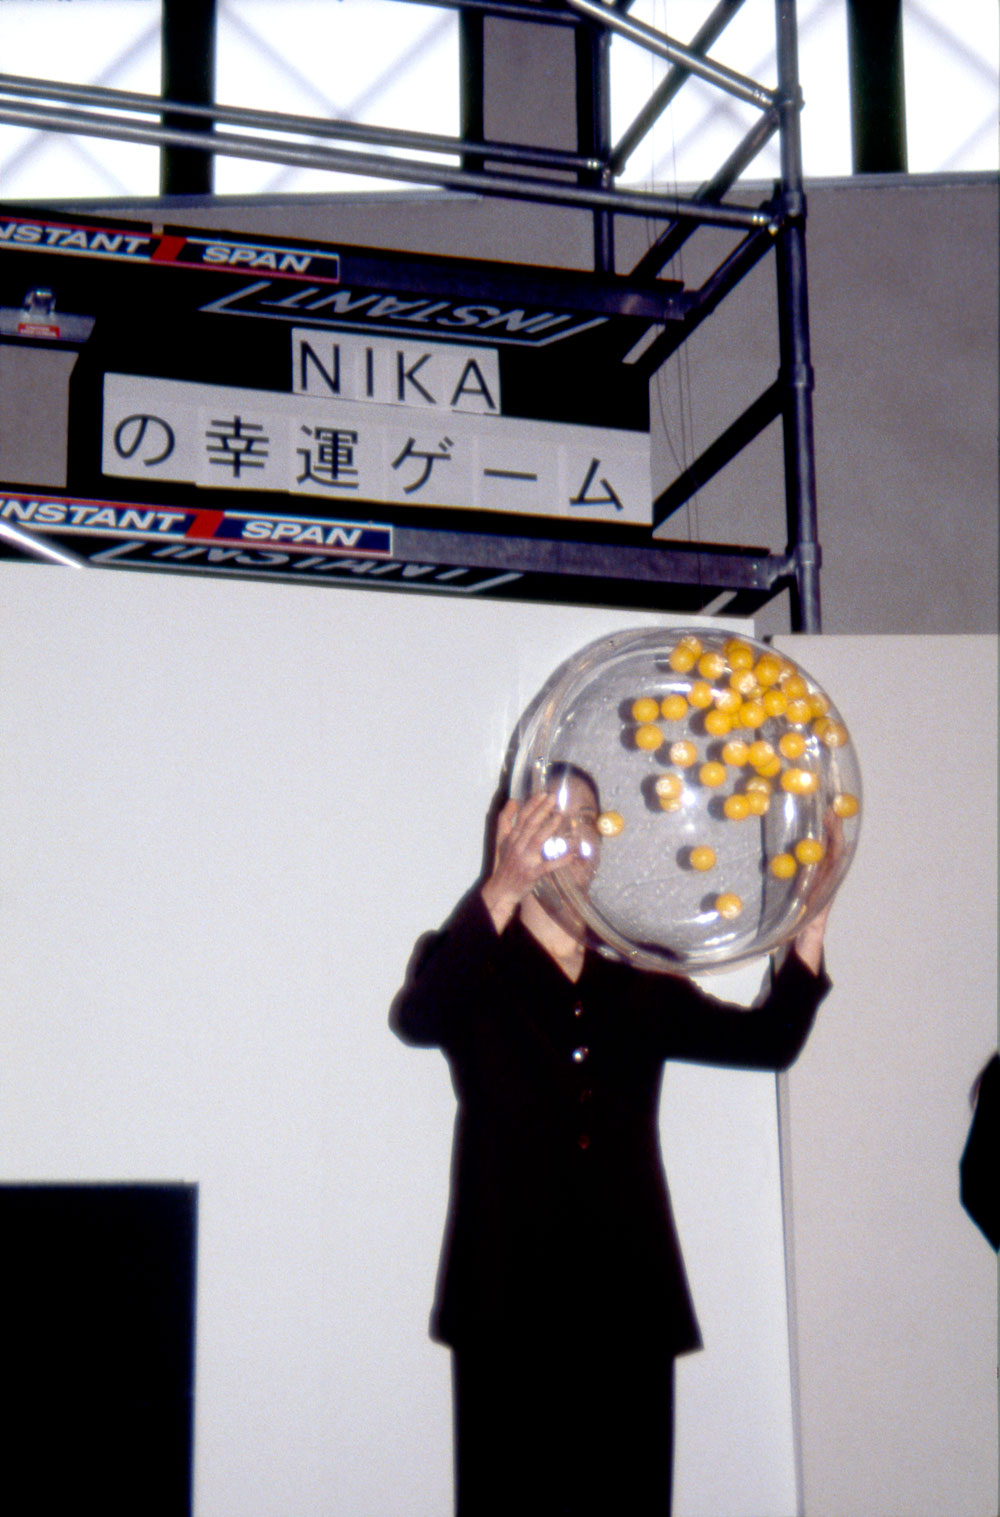 Art, artwork. A performance entitled "Nika's Game of Chance" by Nika Span / Nika Špan. Material: 49 numbered table tennis balls, a Plexiglas sphere, a fan, 20 copies of a lottery ticket, a female assistant. Exhibition: Academy Exchange, School of Art and Design, Seoul, Korea; Tokyo Geijutsu, Tokyo, Japan.